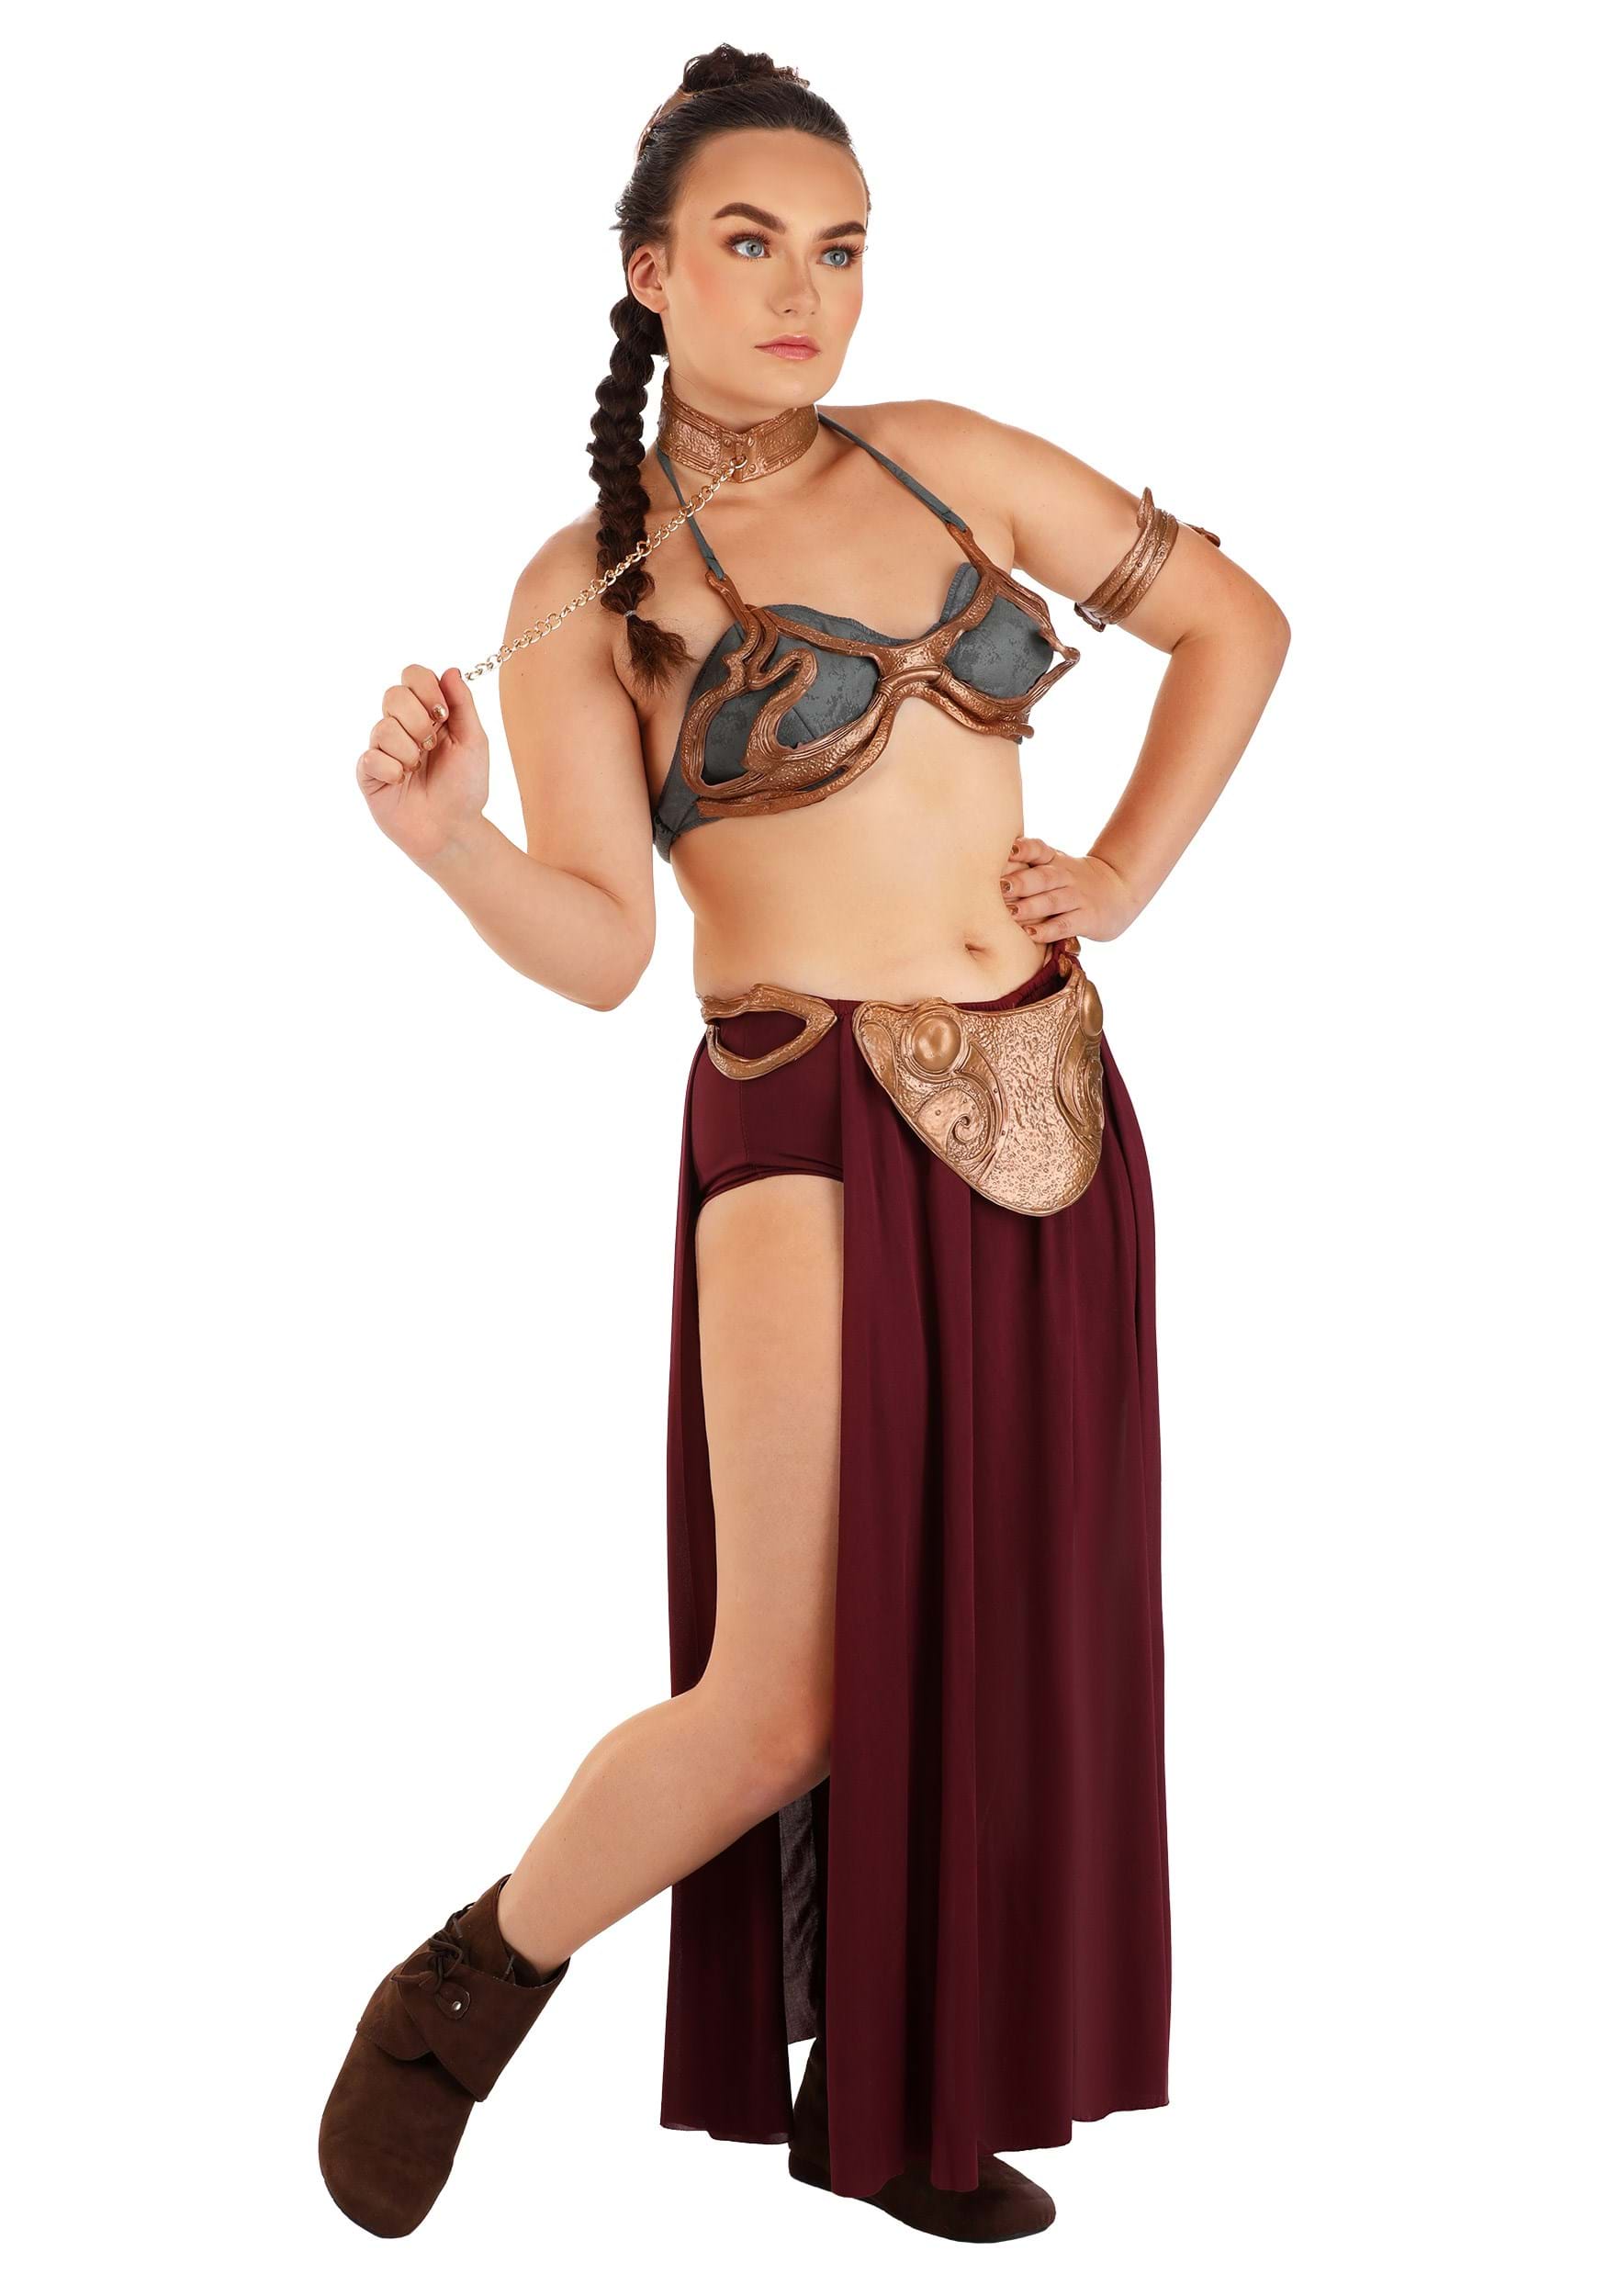 andy welborn recommends princess leia slave costume pictures pic